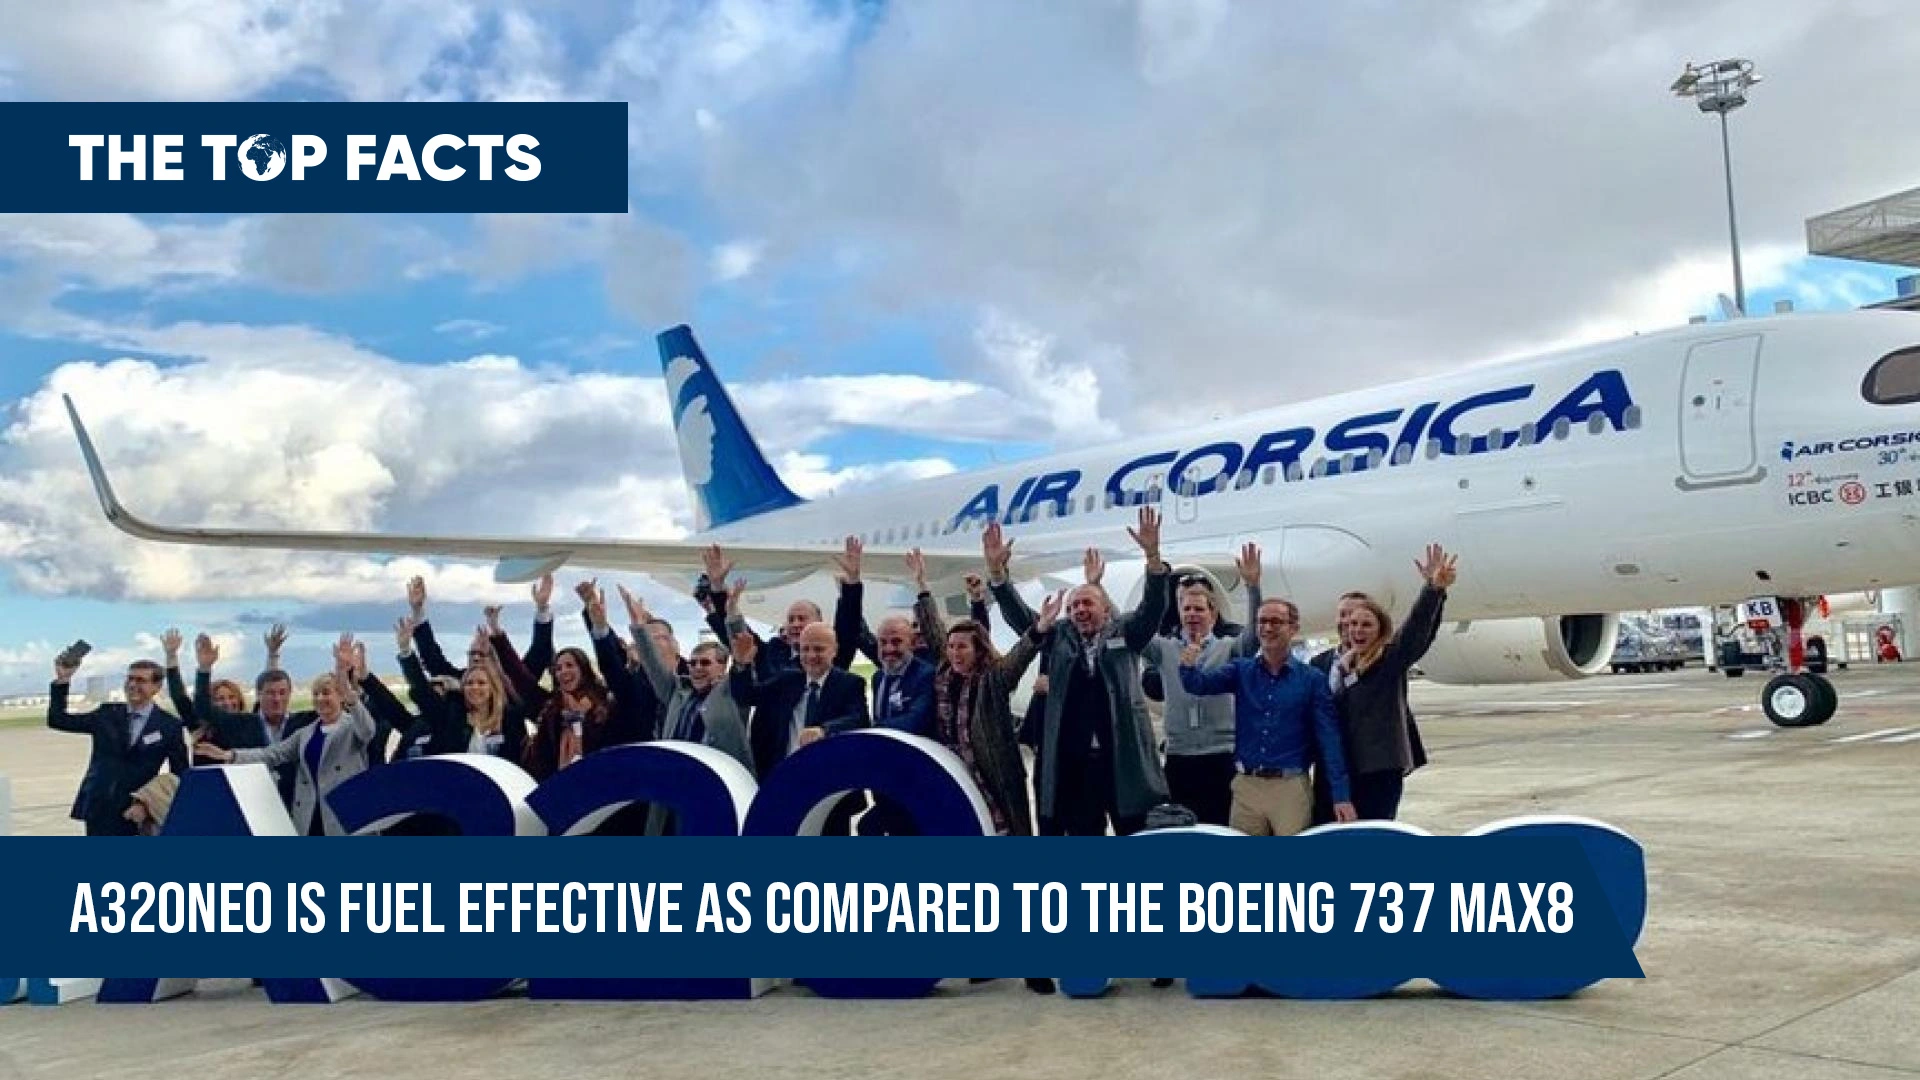 The Airbus A320neo is more fuel efficient compared to the Boeing 737 Max8.